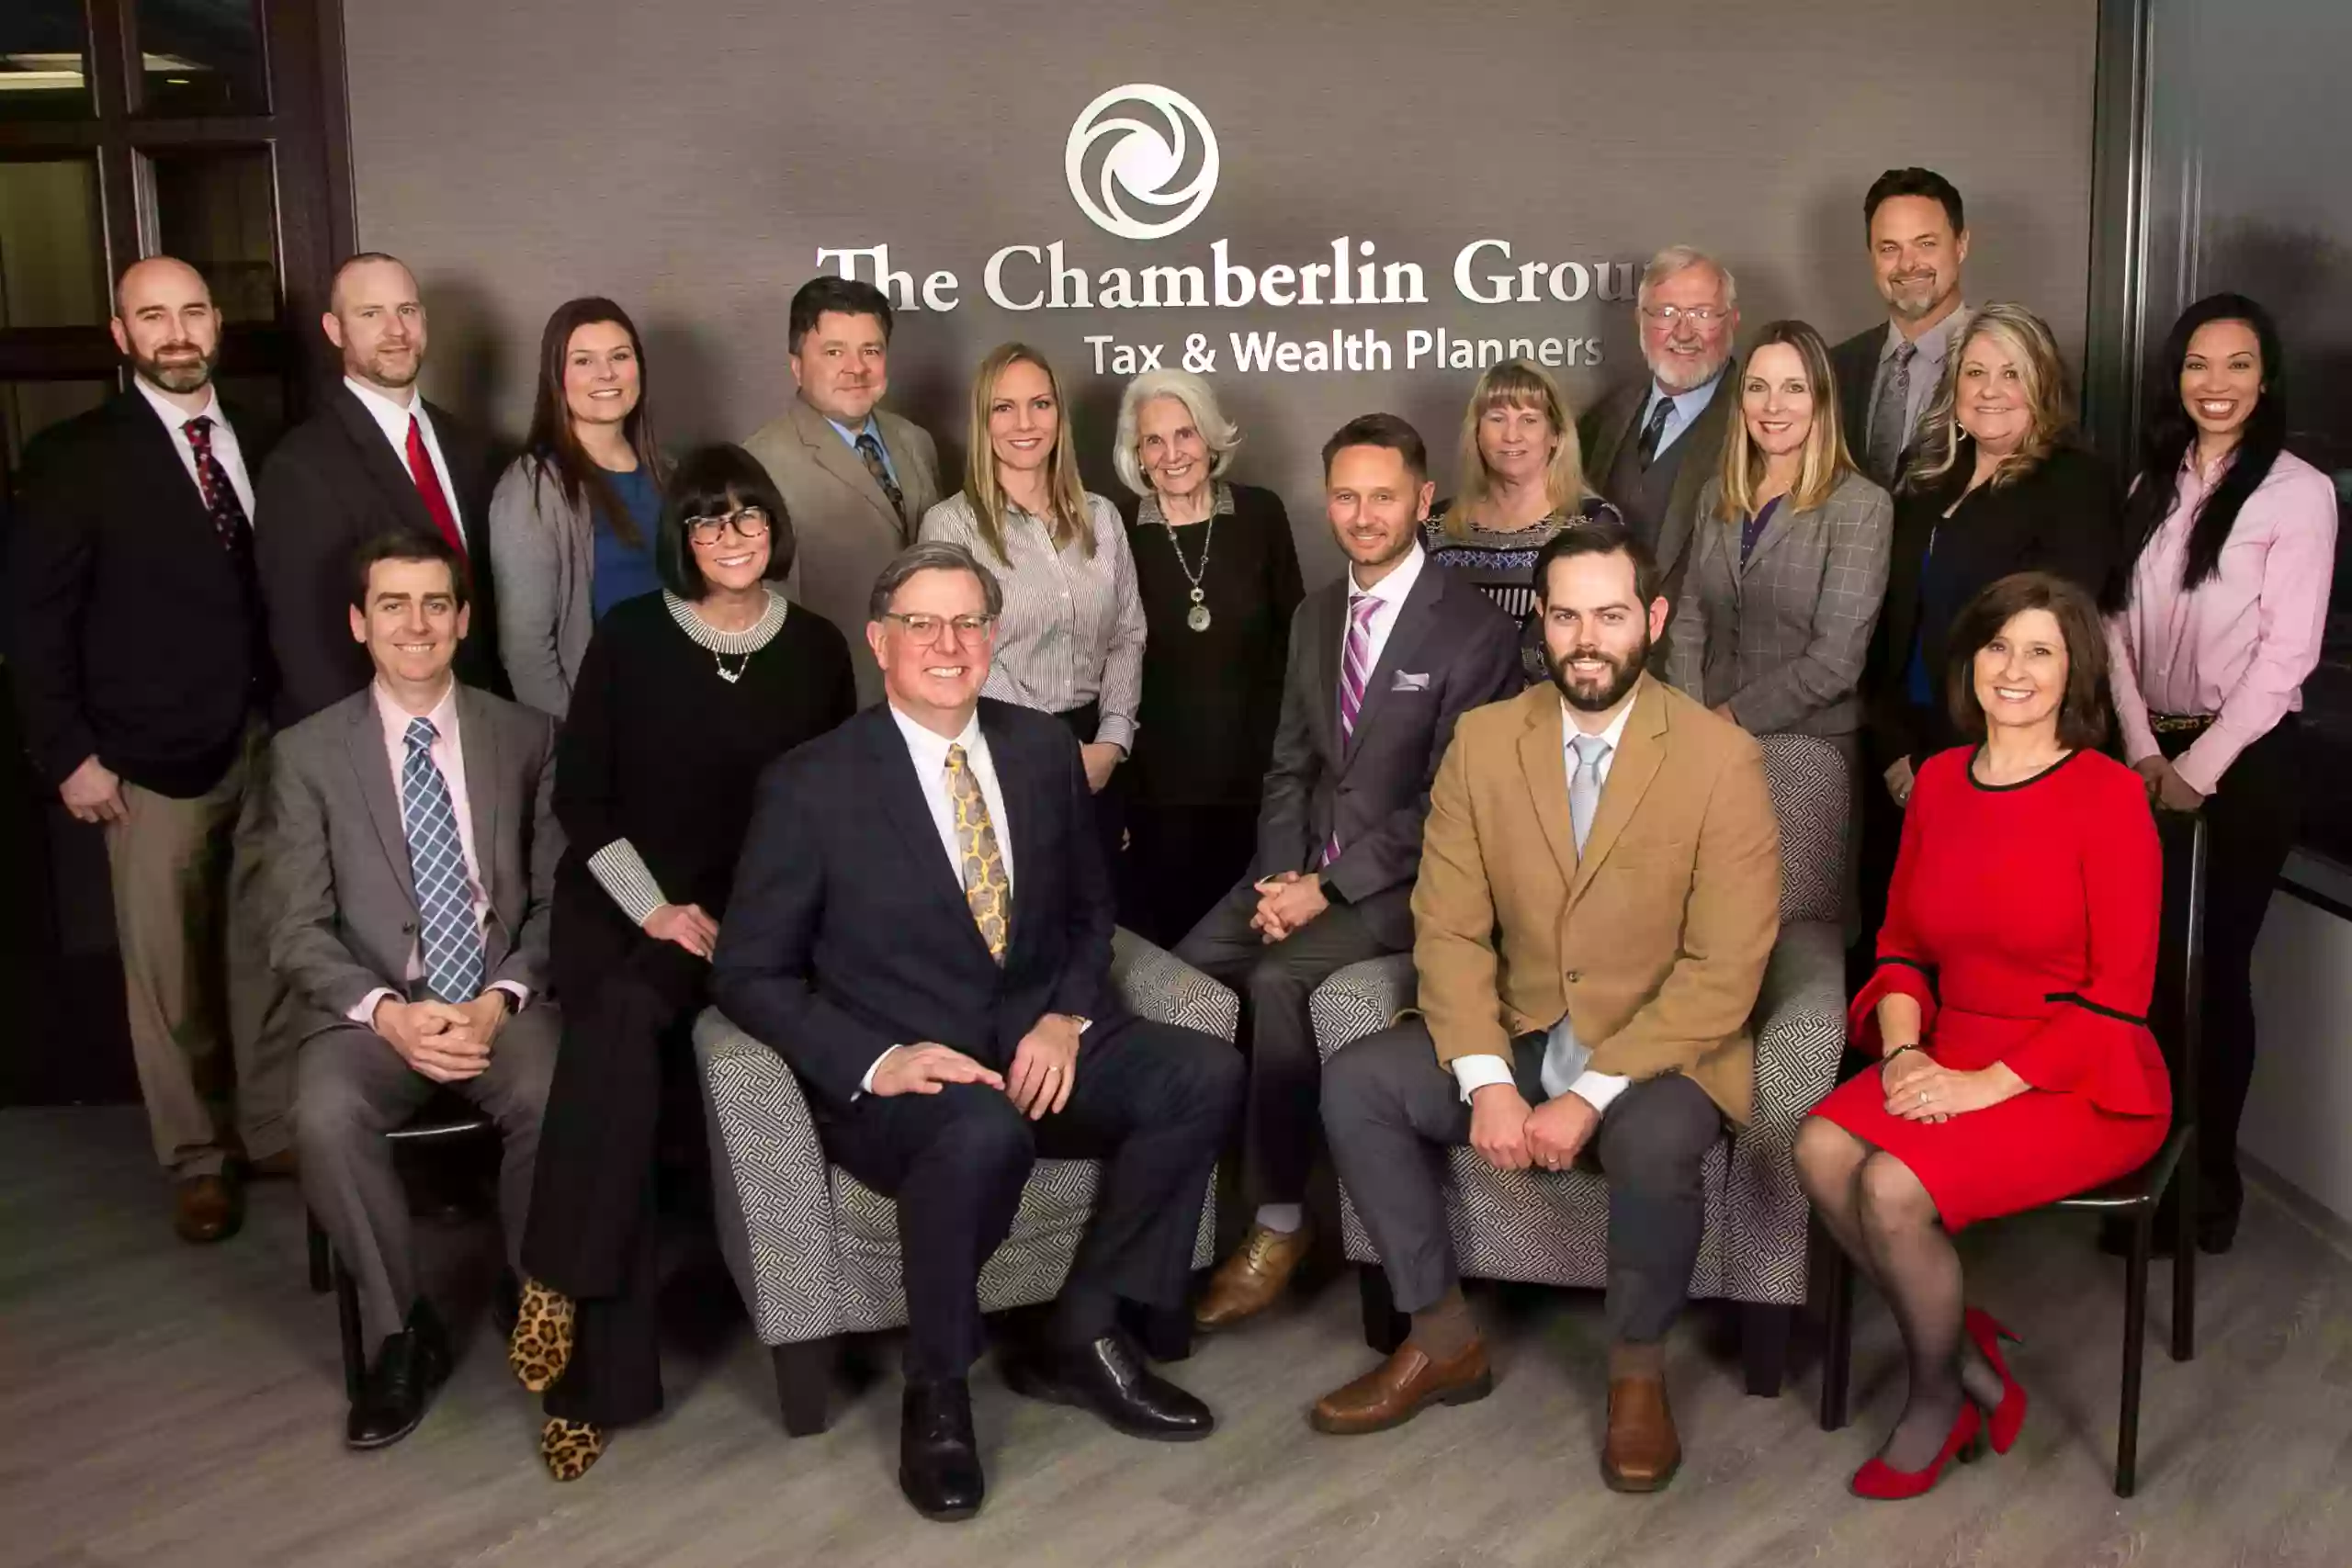 The Chamberlin Group